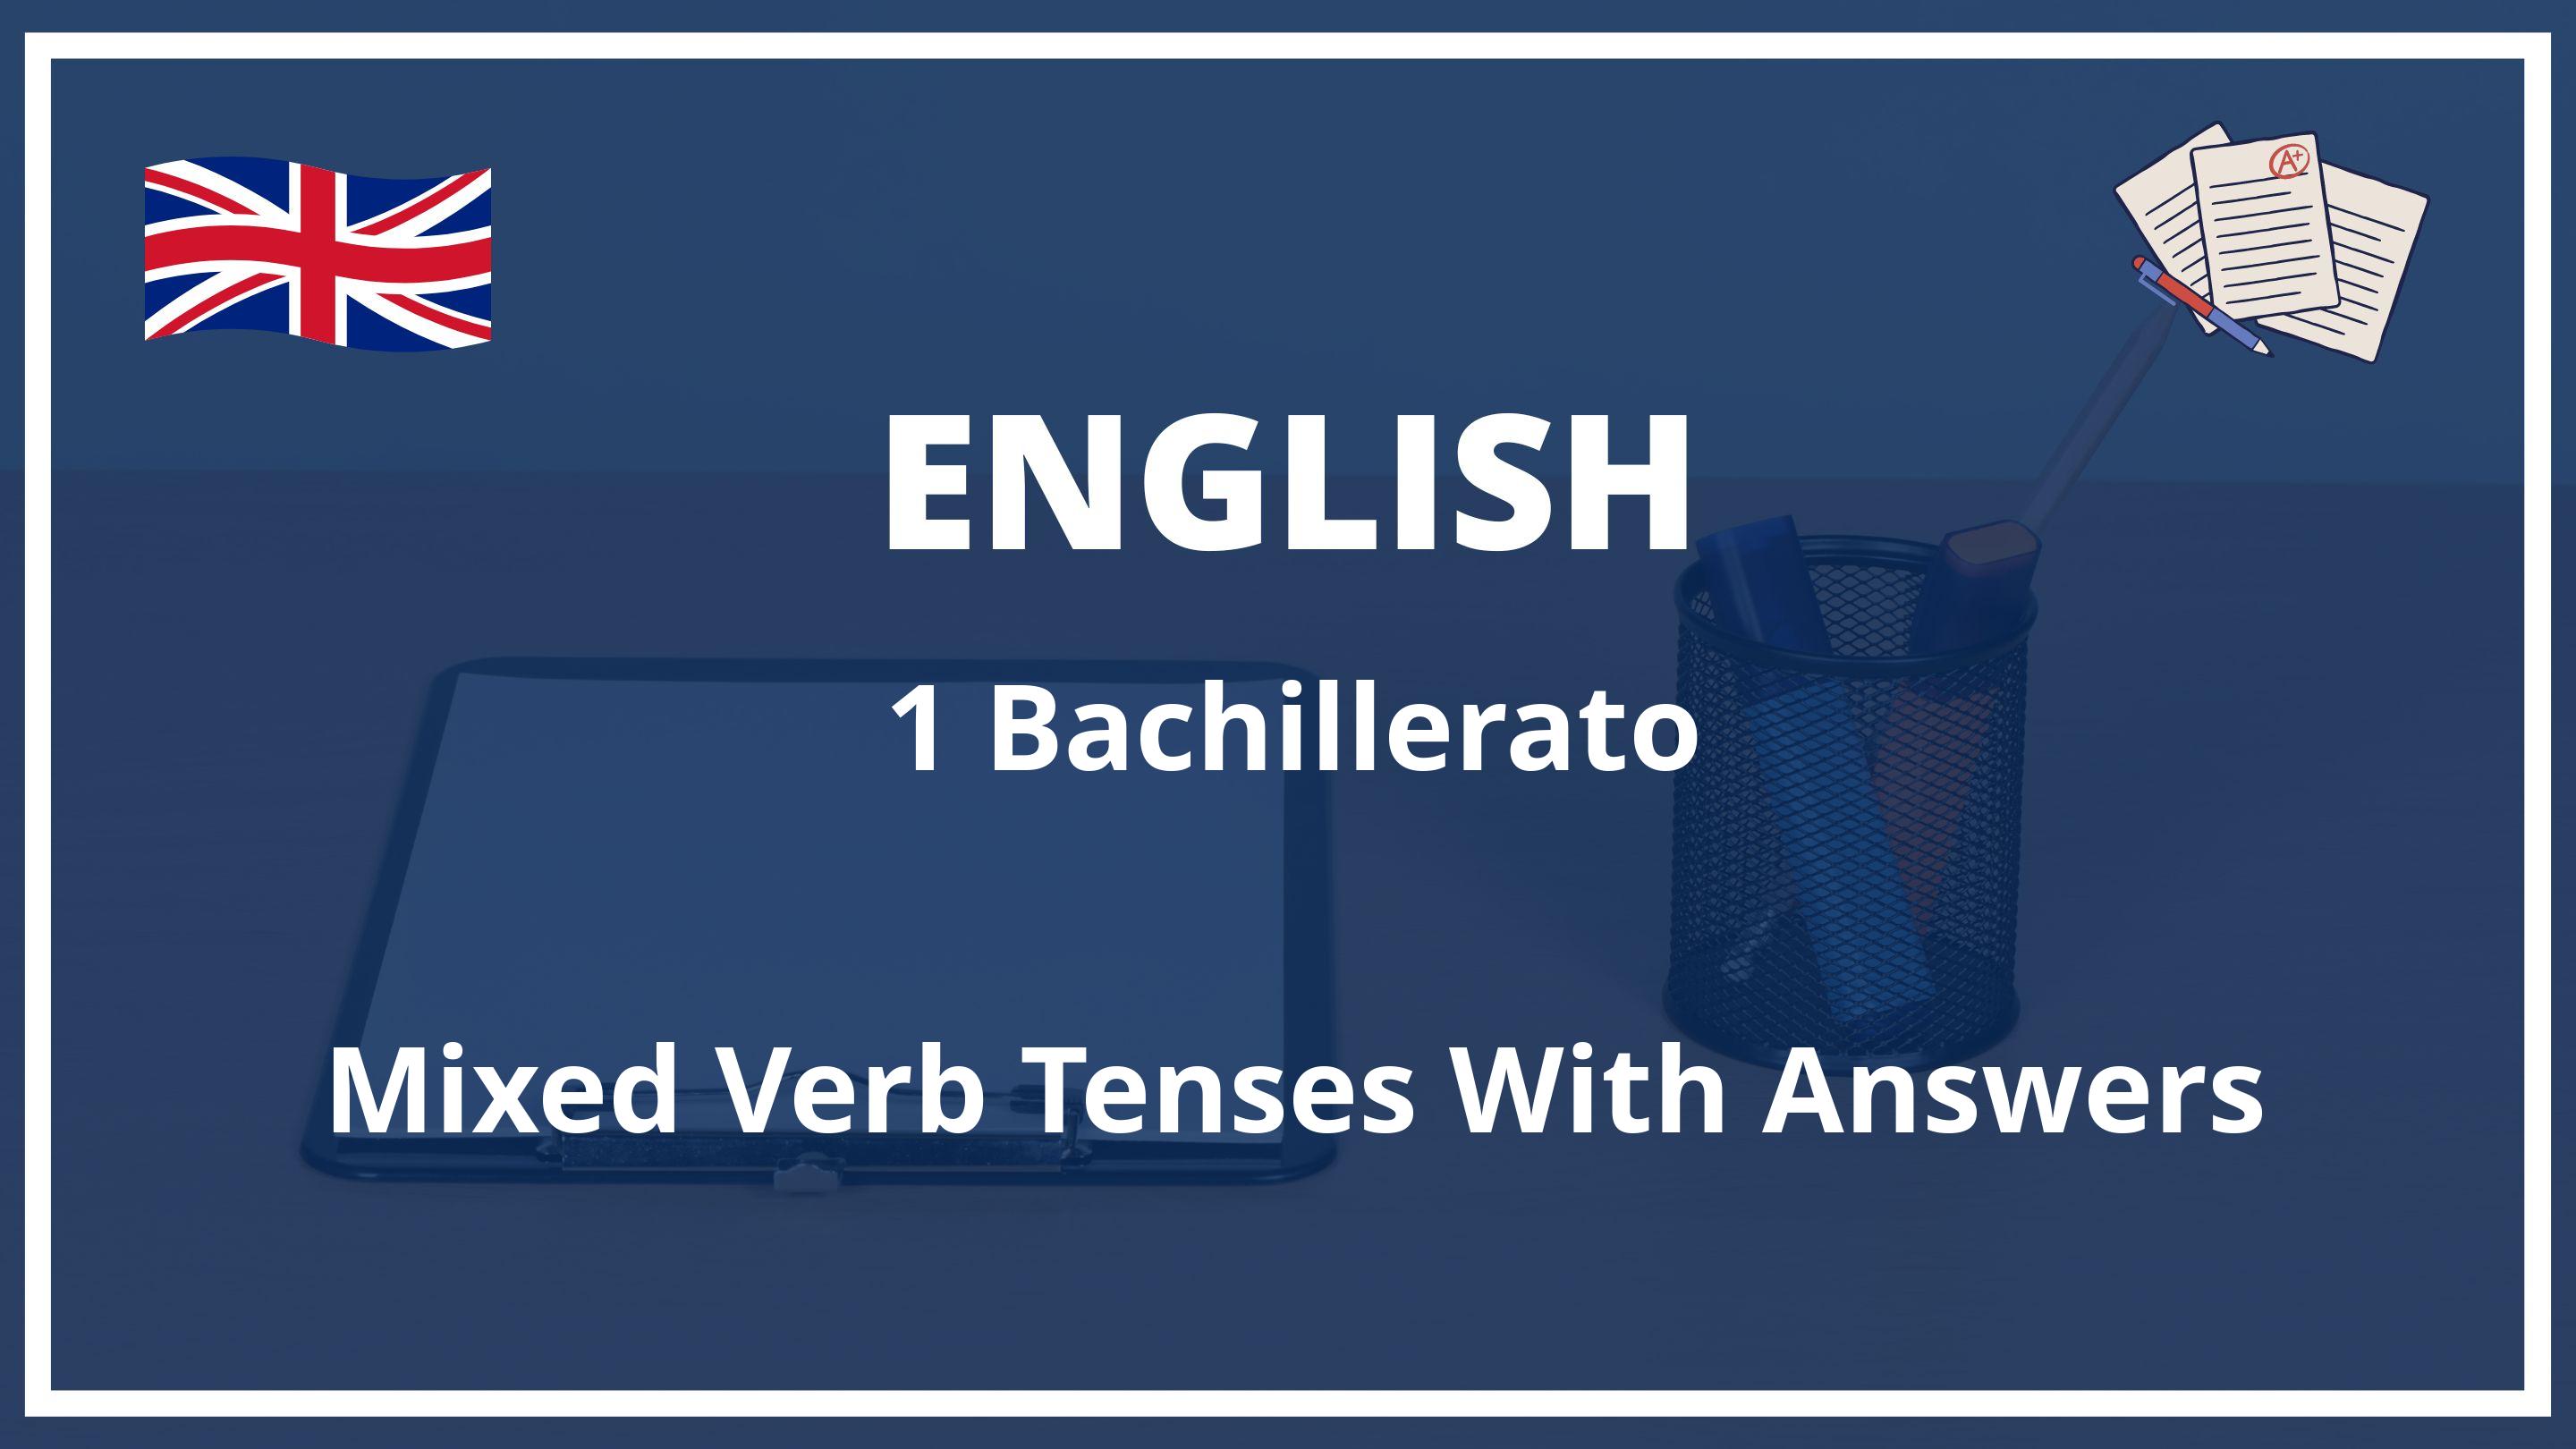 Mixed Verb Tenses With Answers 1 Bachillerato